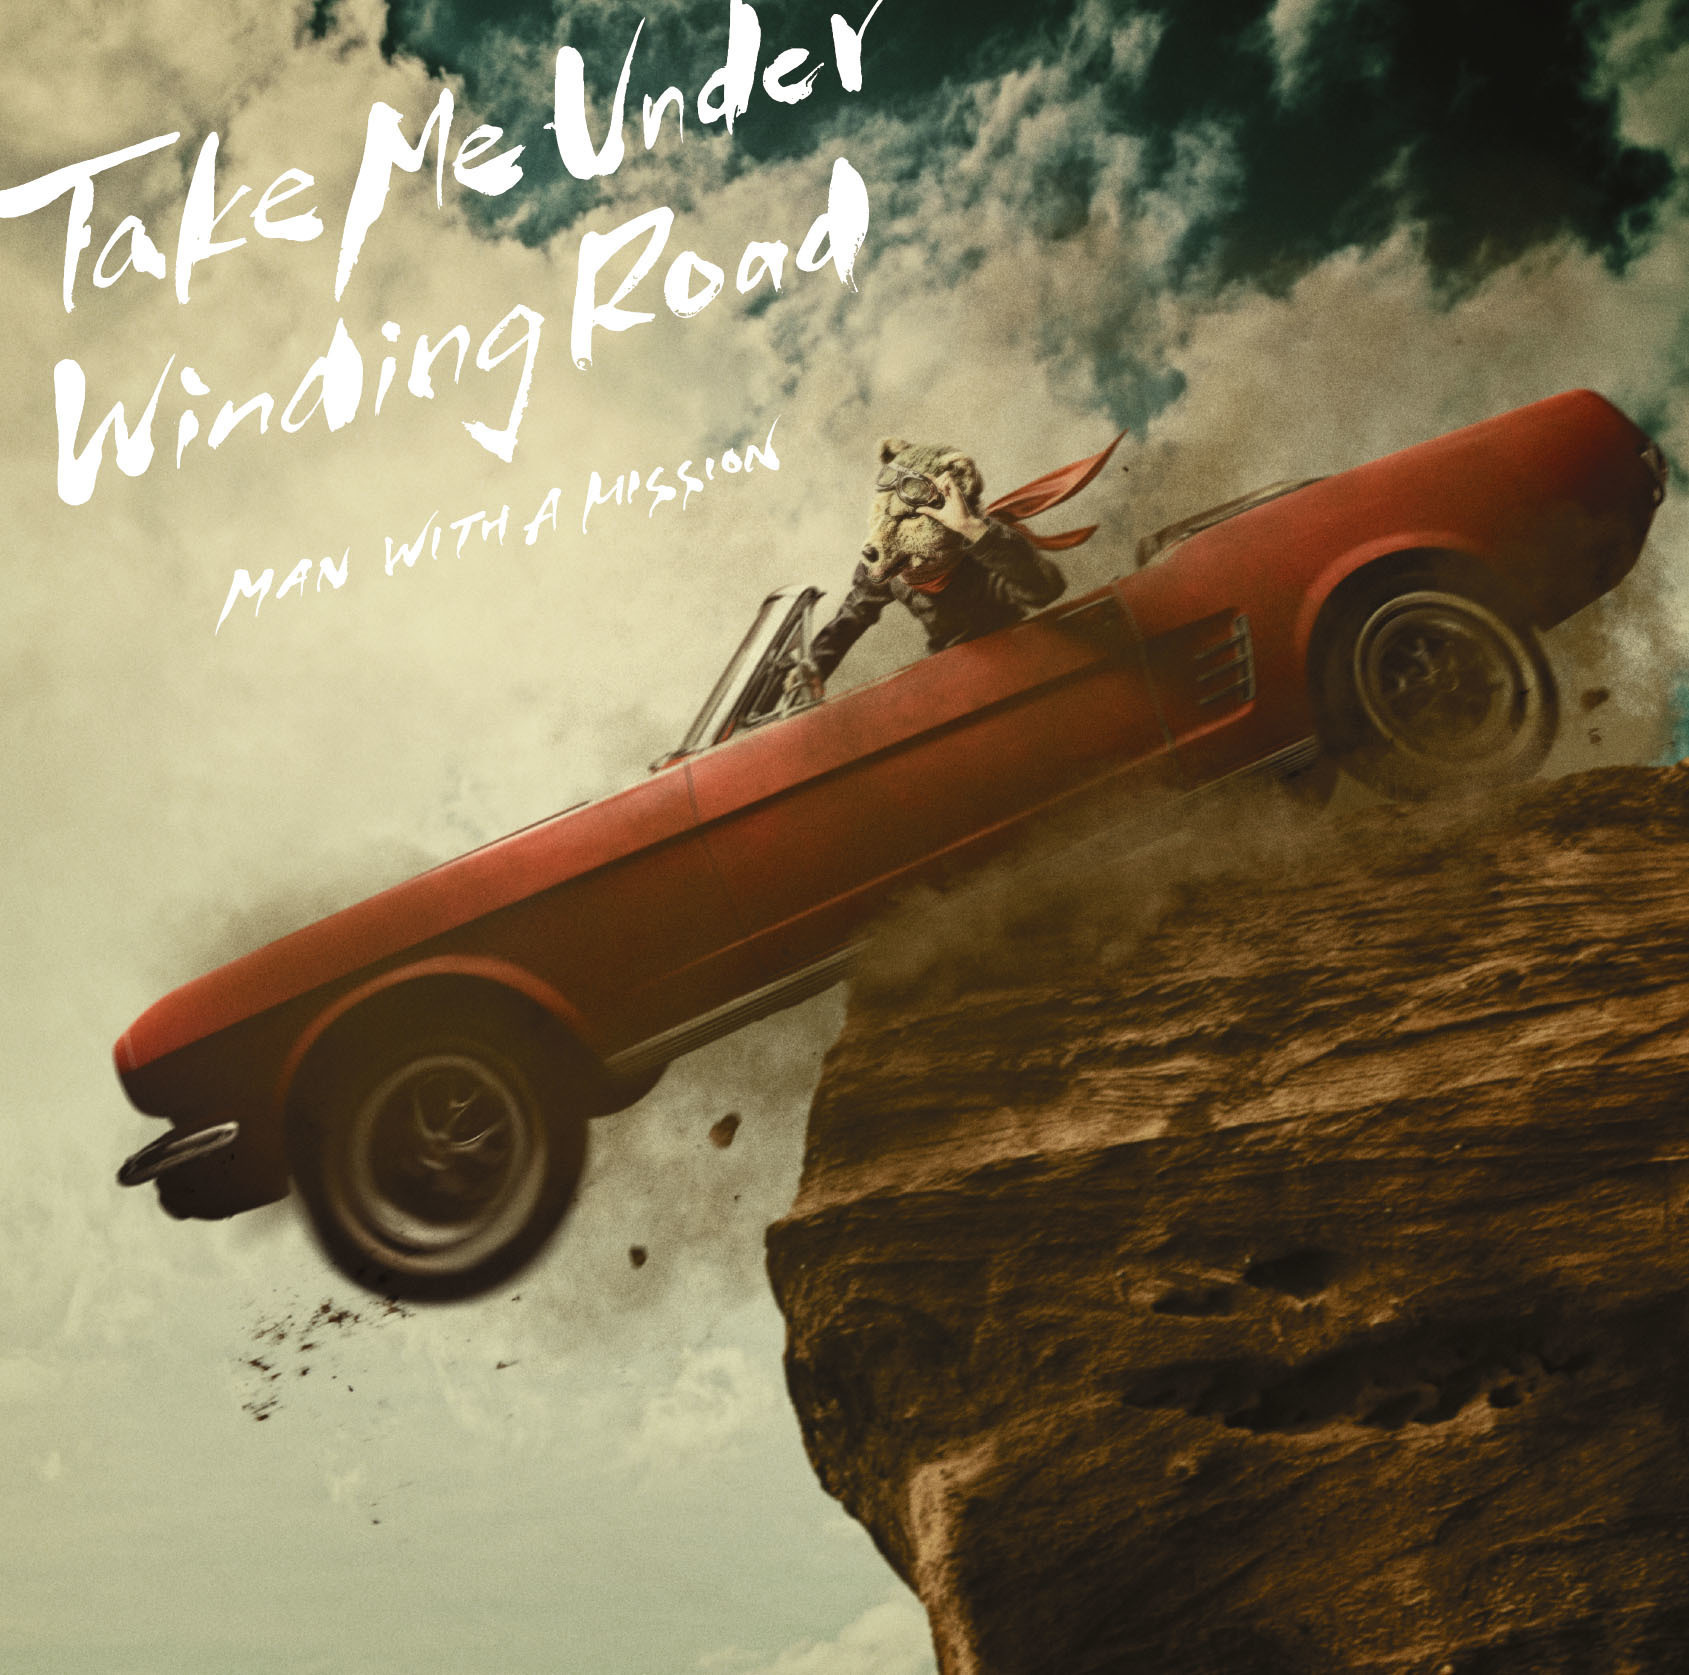 Take Me Under / Winding Road【通常盤】 | MAN WITH A MISSION